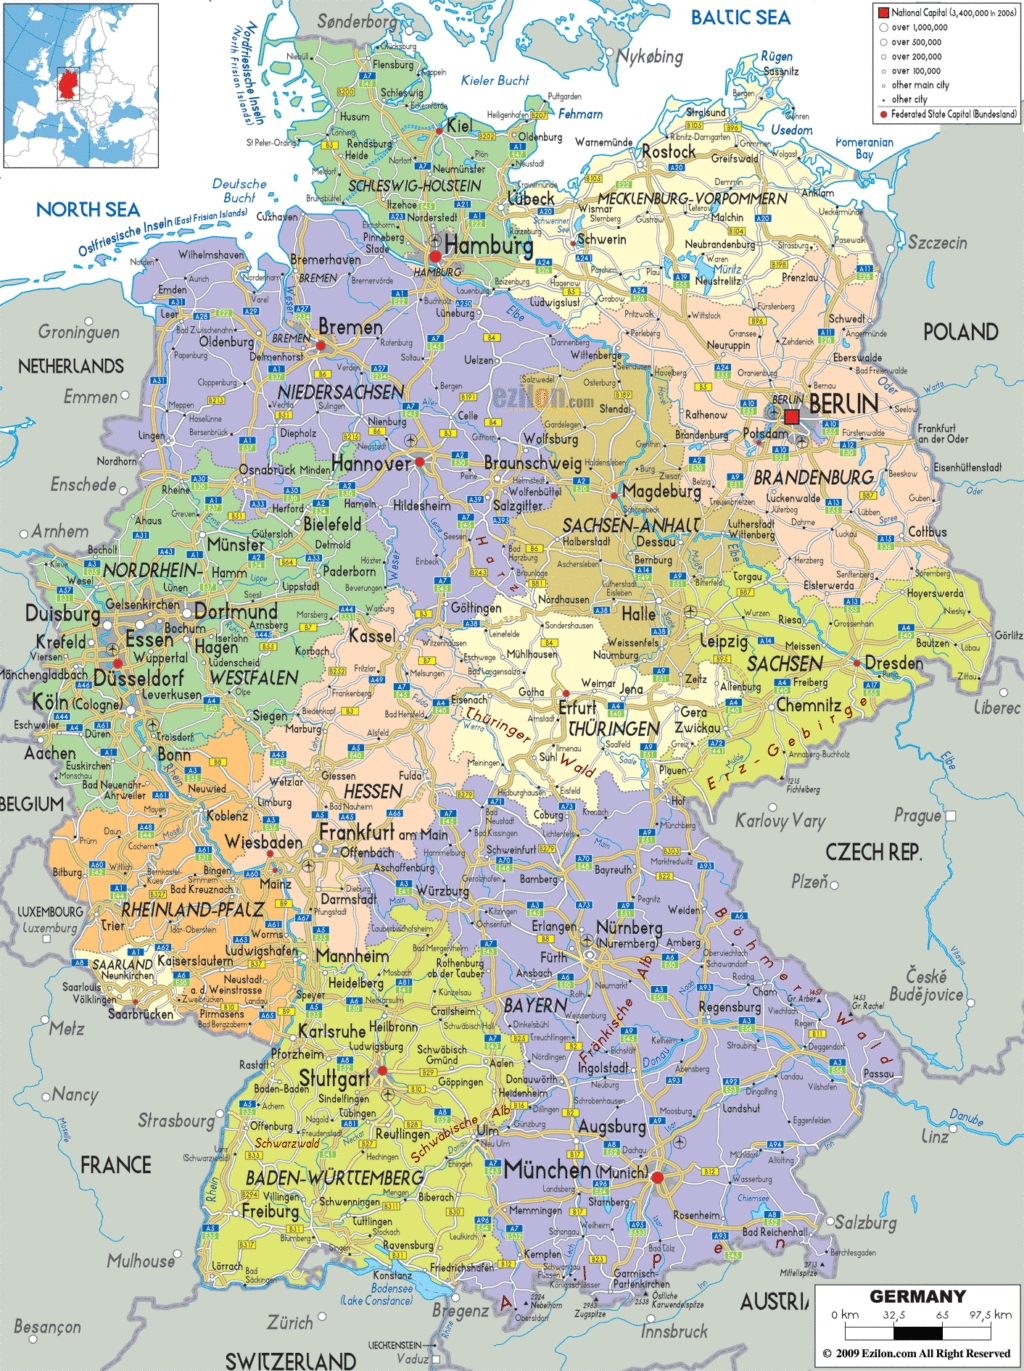 Germany political map.